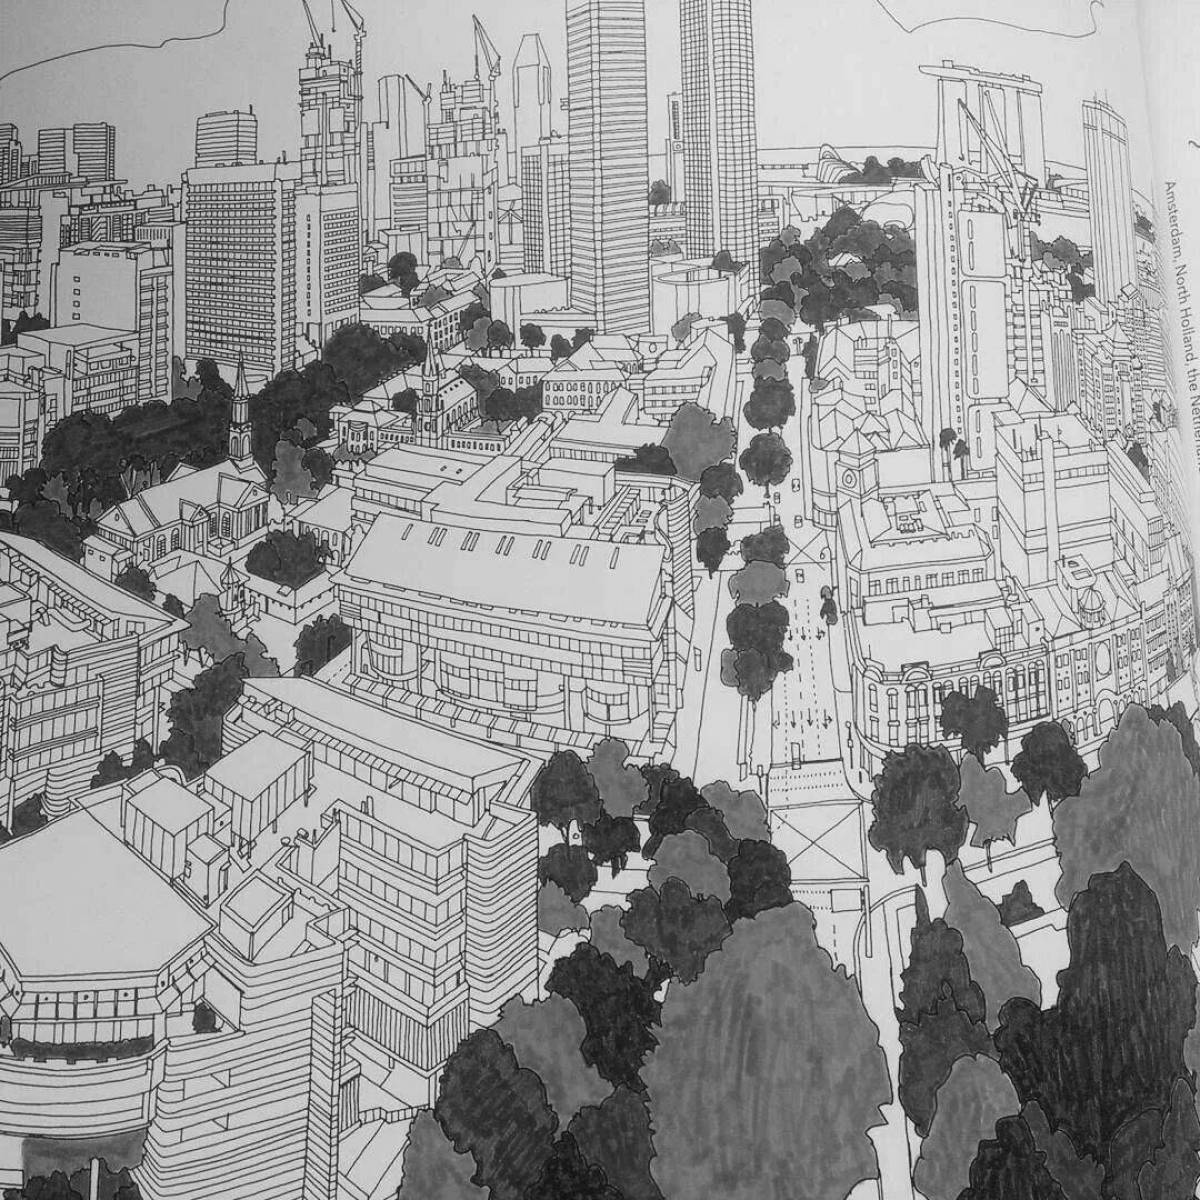 Coloring book fabulous amazing cities